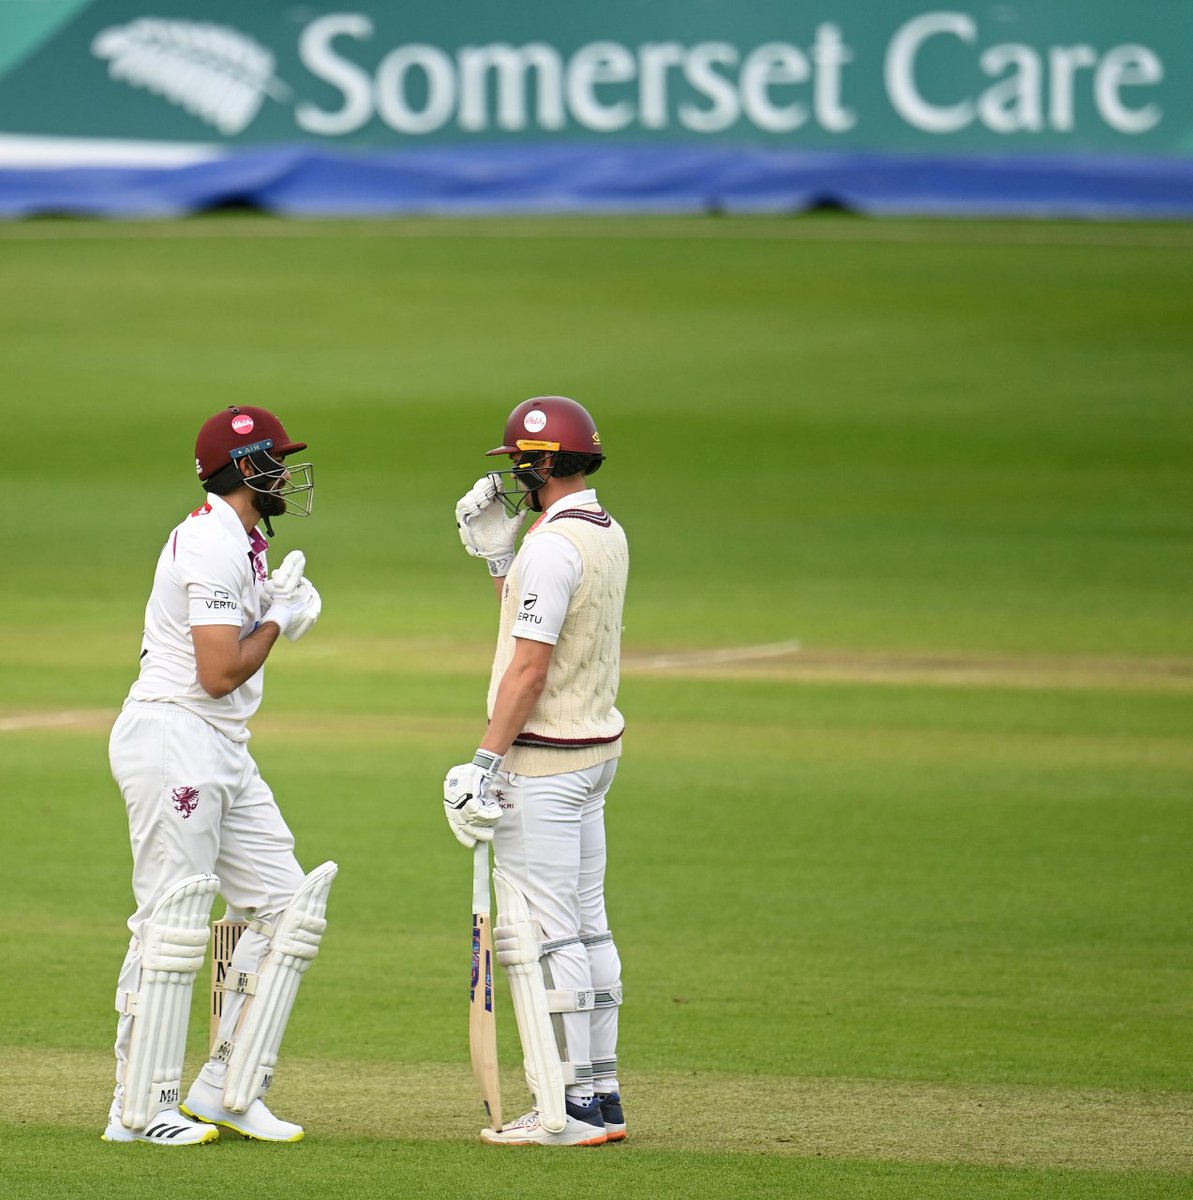 🏏We are proud sponsors of the @SomersetCCC this season 🏏 It was great to see our pitch side board in this shot of Andy Umeed and Tom Lammonby batting at the recent County Championship match against Essex. #WeAreSomerset #SOMvESS